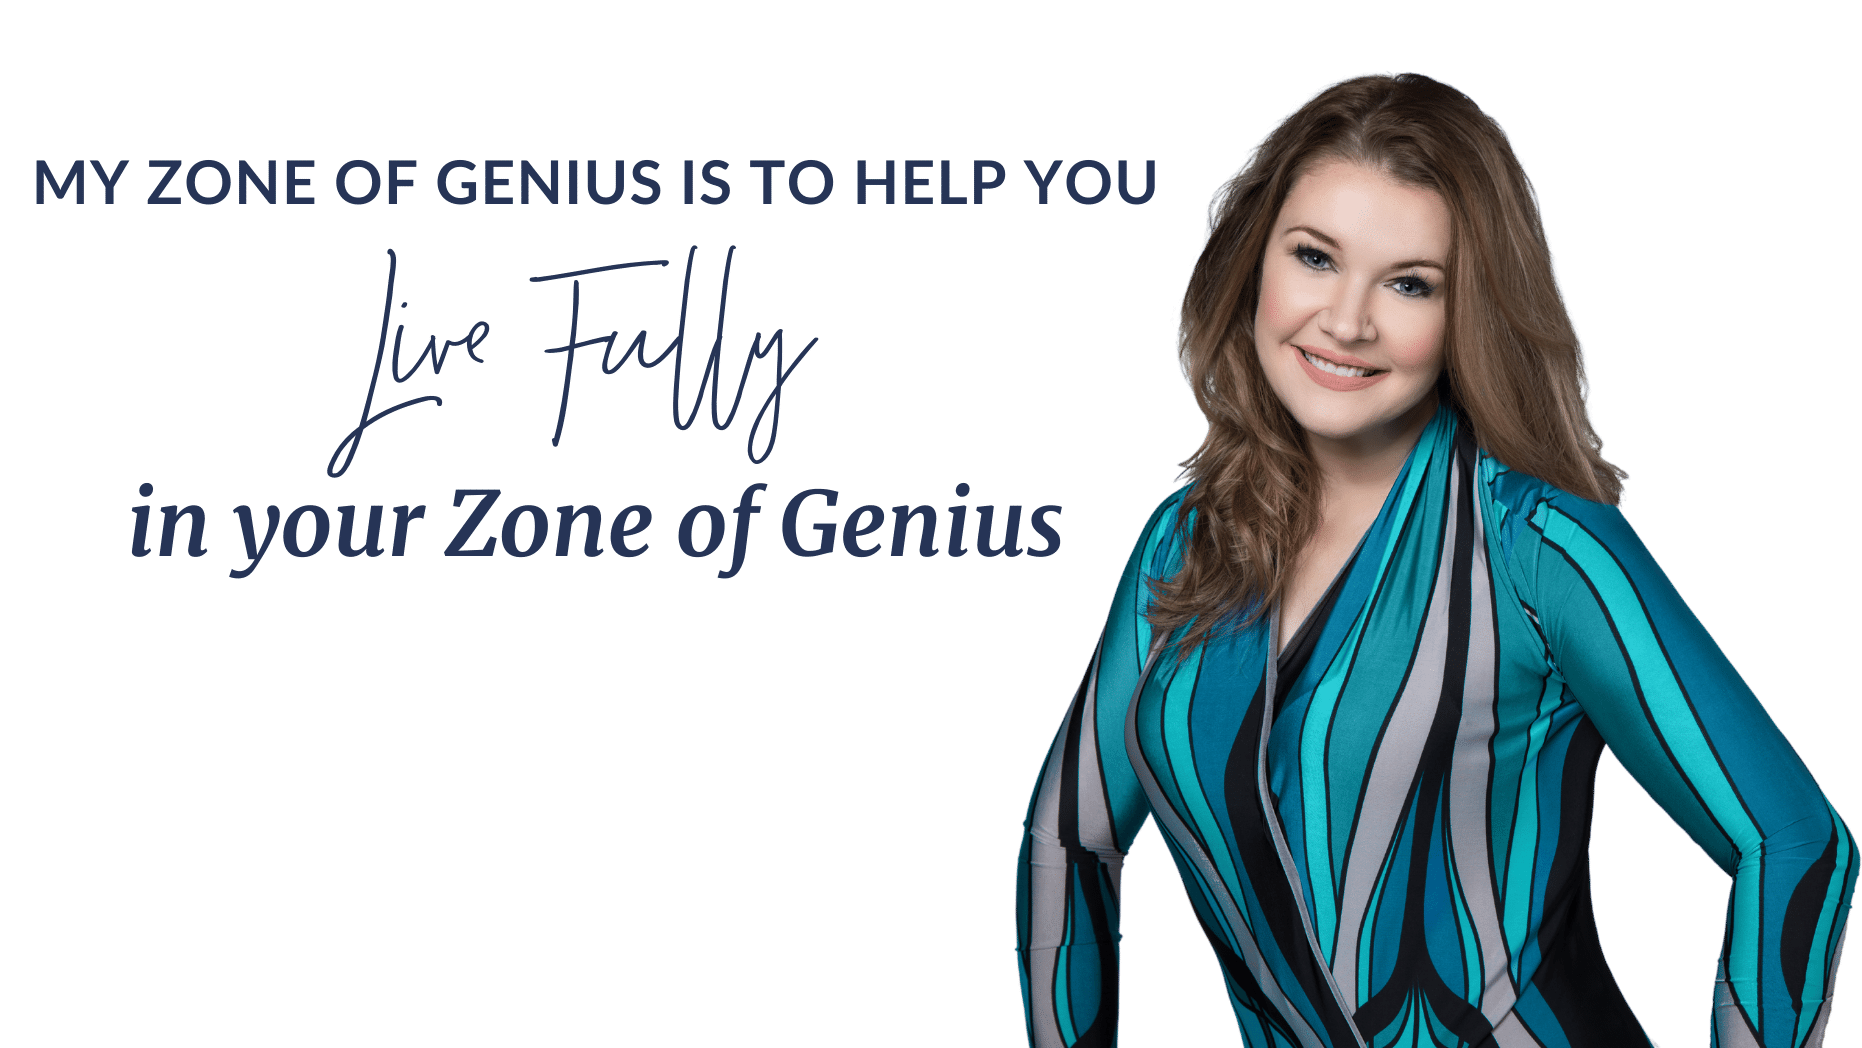 My Zone of Genius is to help you live fully in your zone of genius